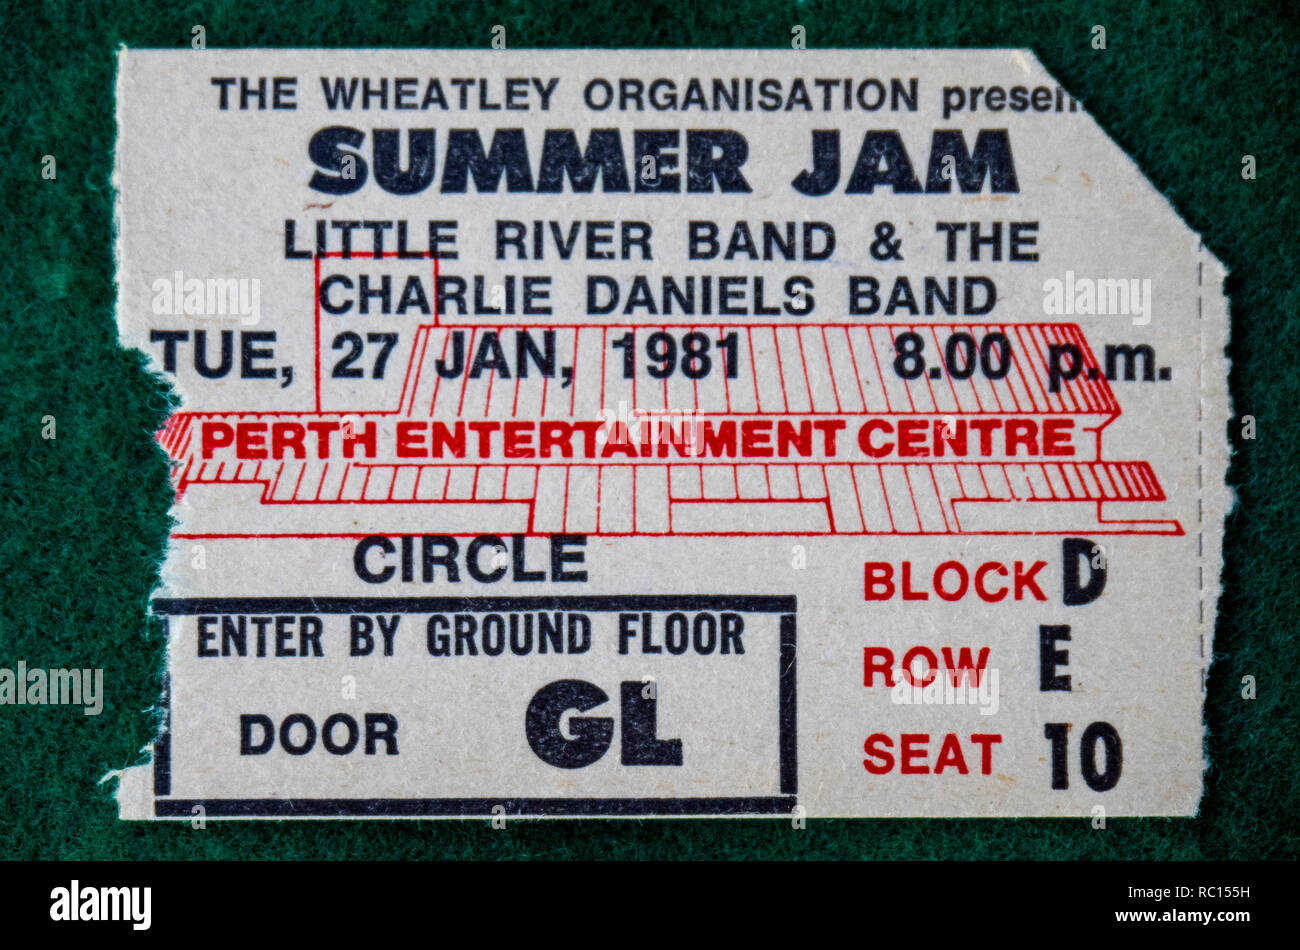 Ticket for Little River Band and Charlie Daniels Band concert at Perth Entertainment Centre in 1981 WA Australia. Stock Photo